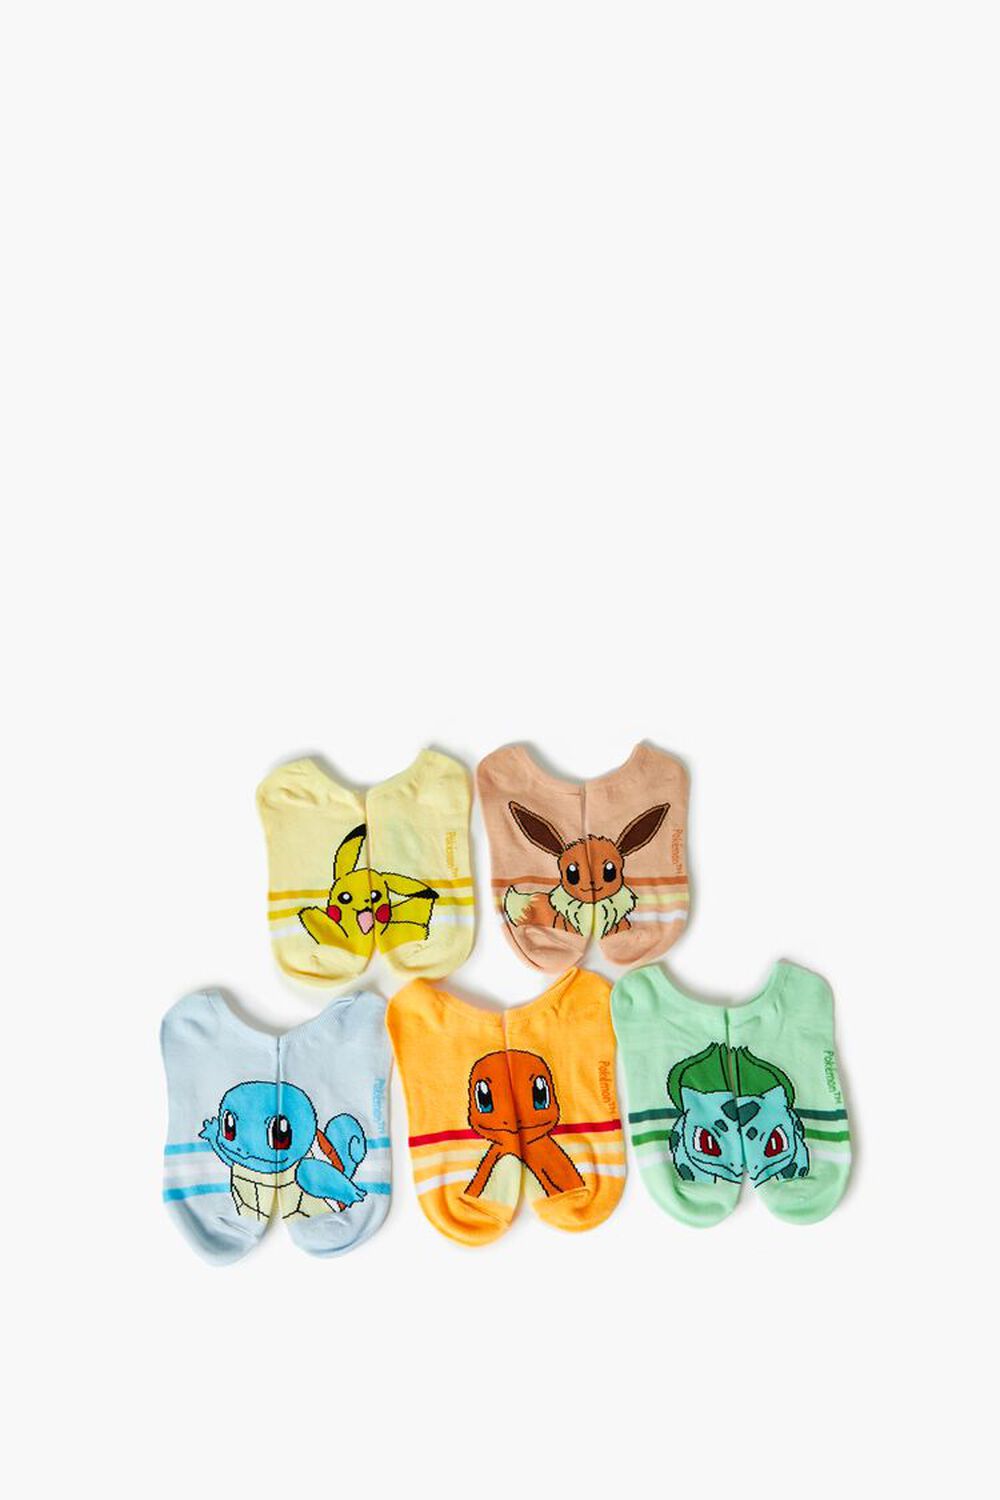 Bioworld Pokemon Characters Assorted 5 Pack Juniors Ankle Socks